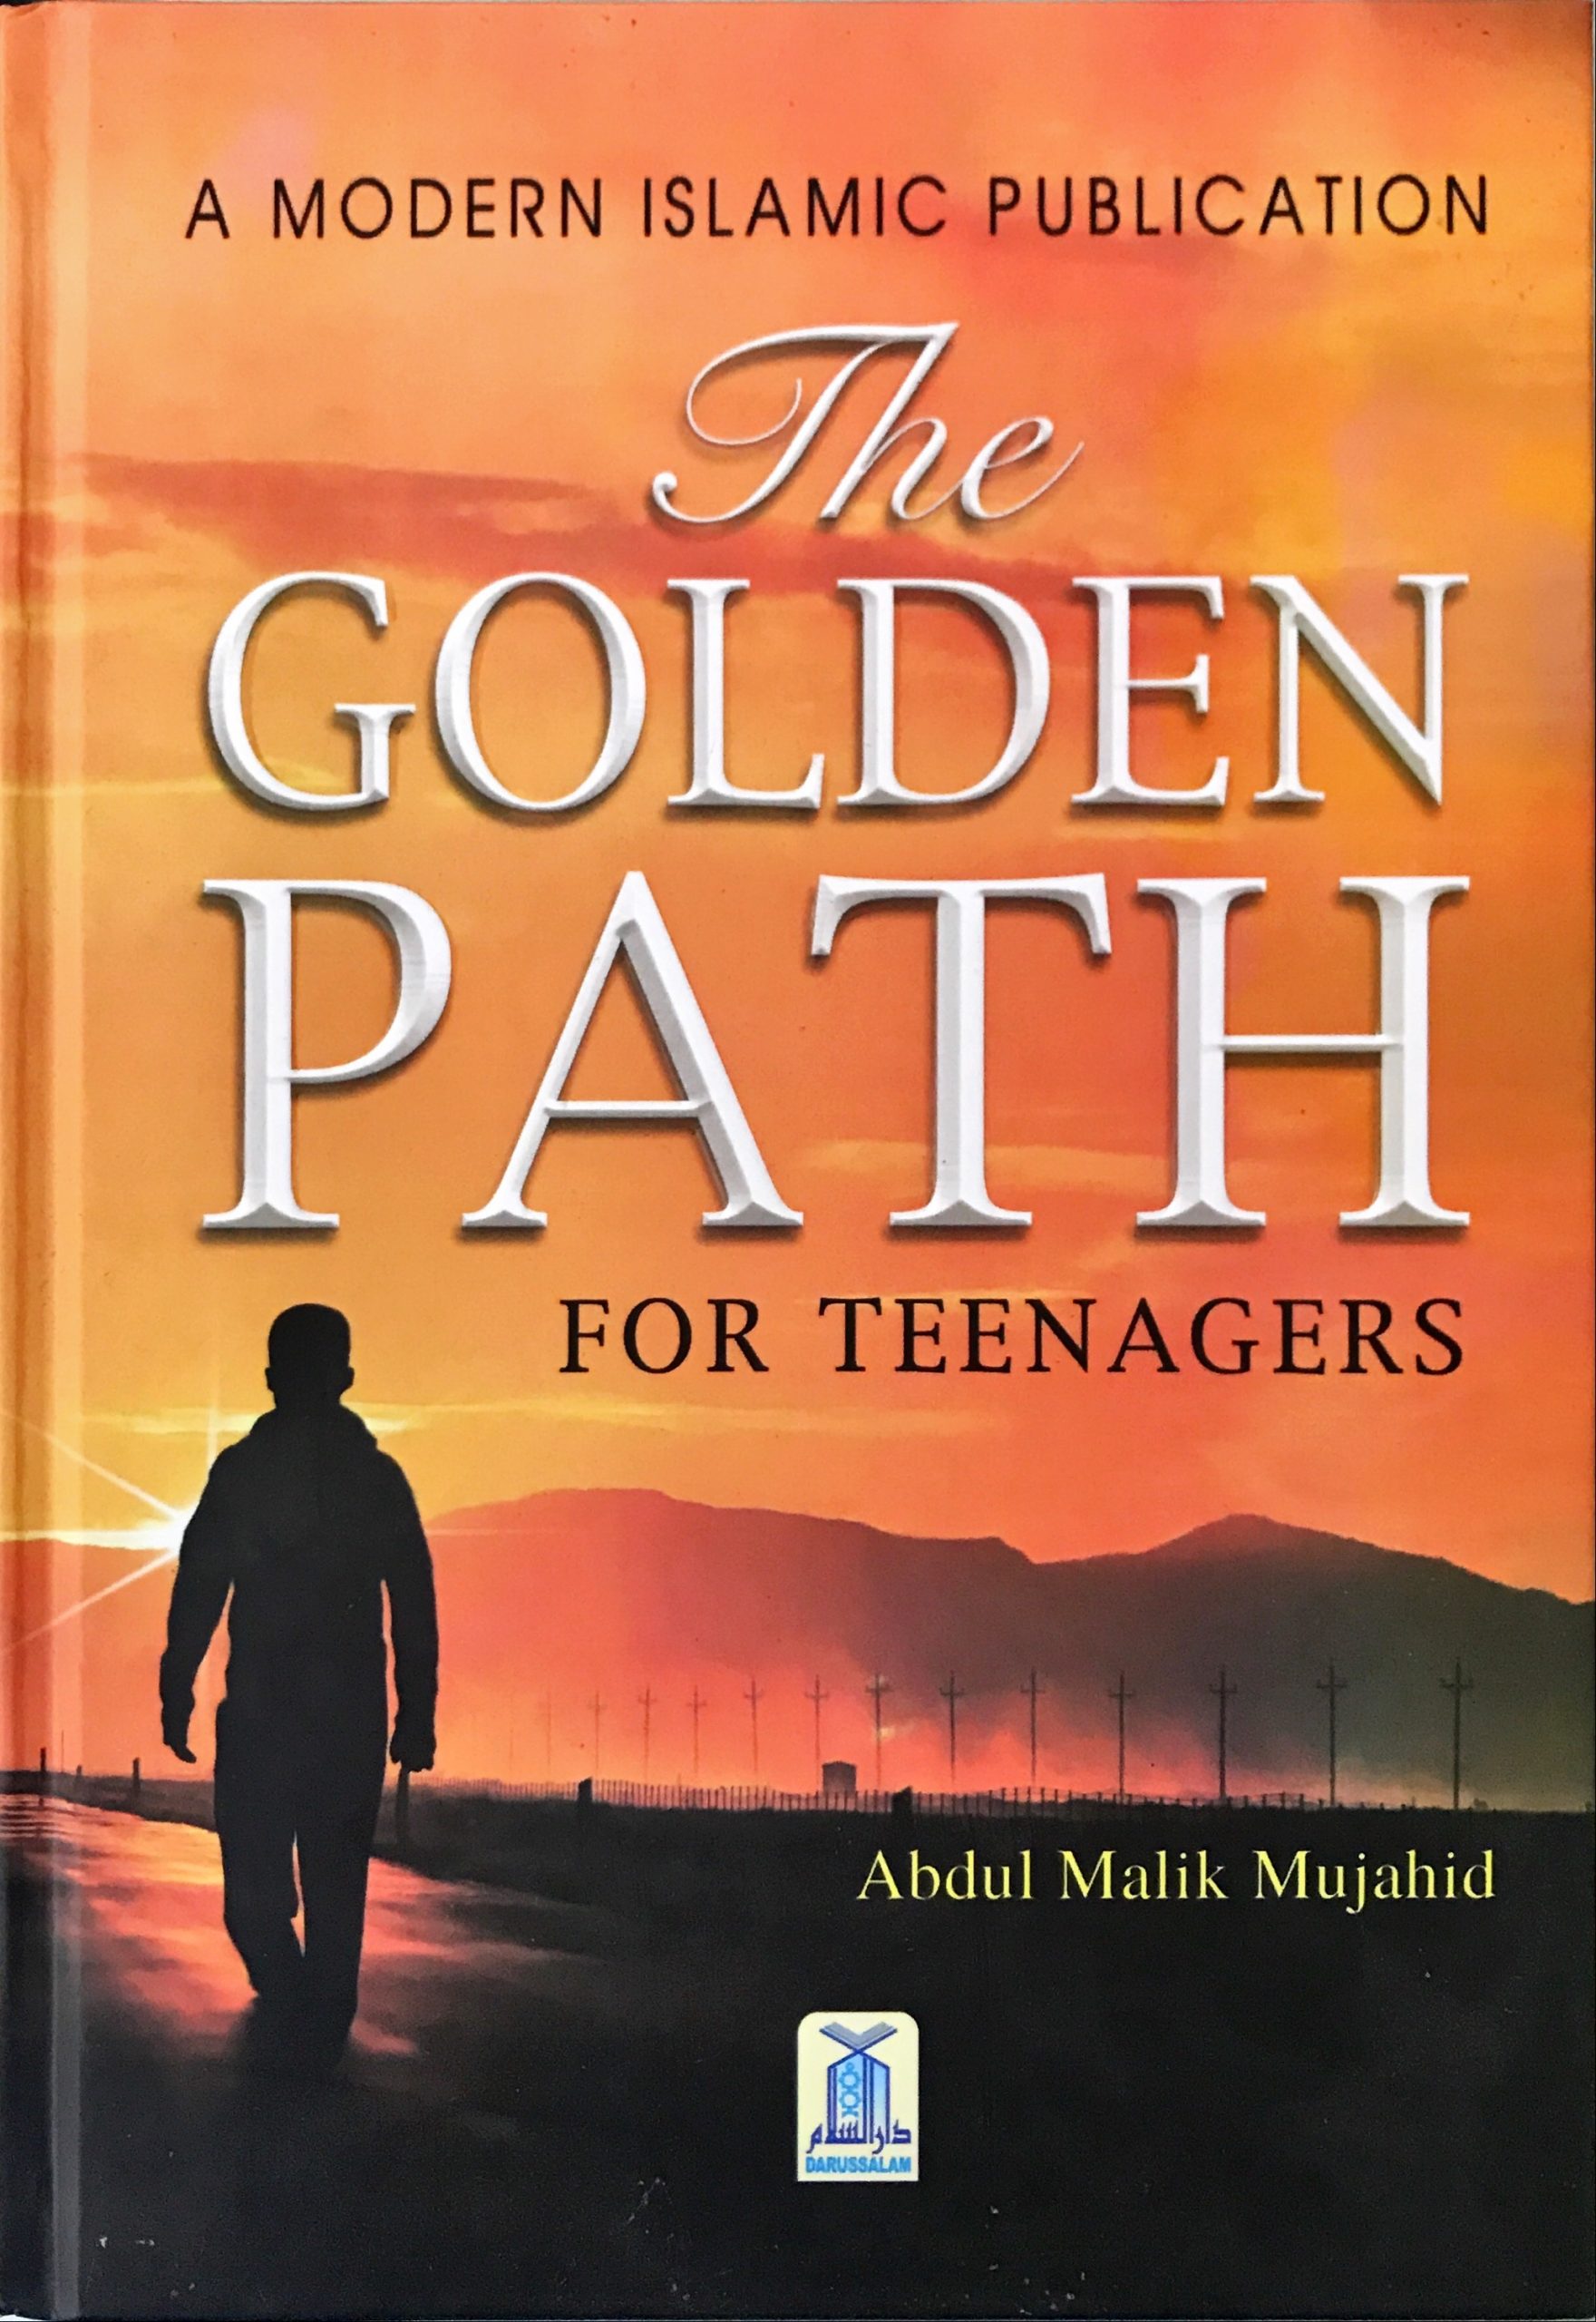 The Golden Path for Teenagers